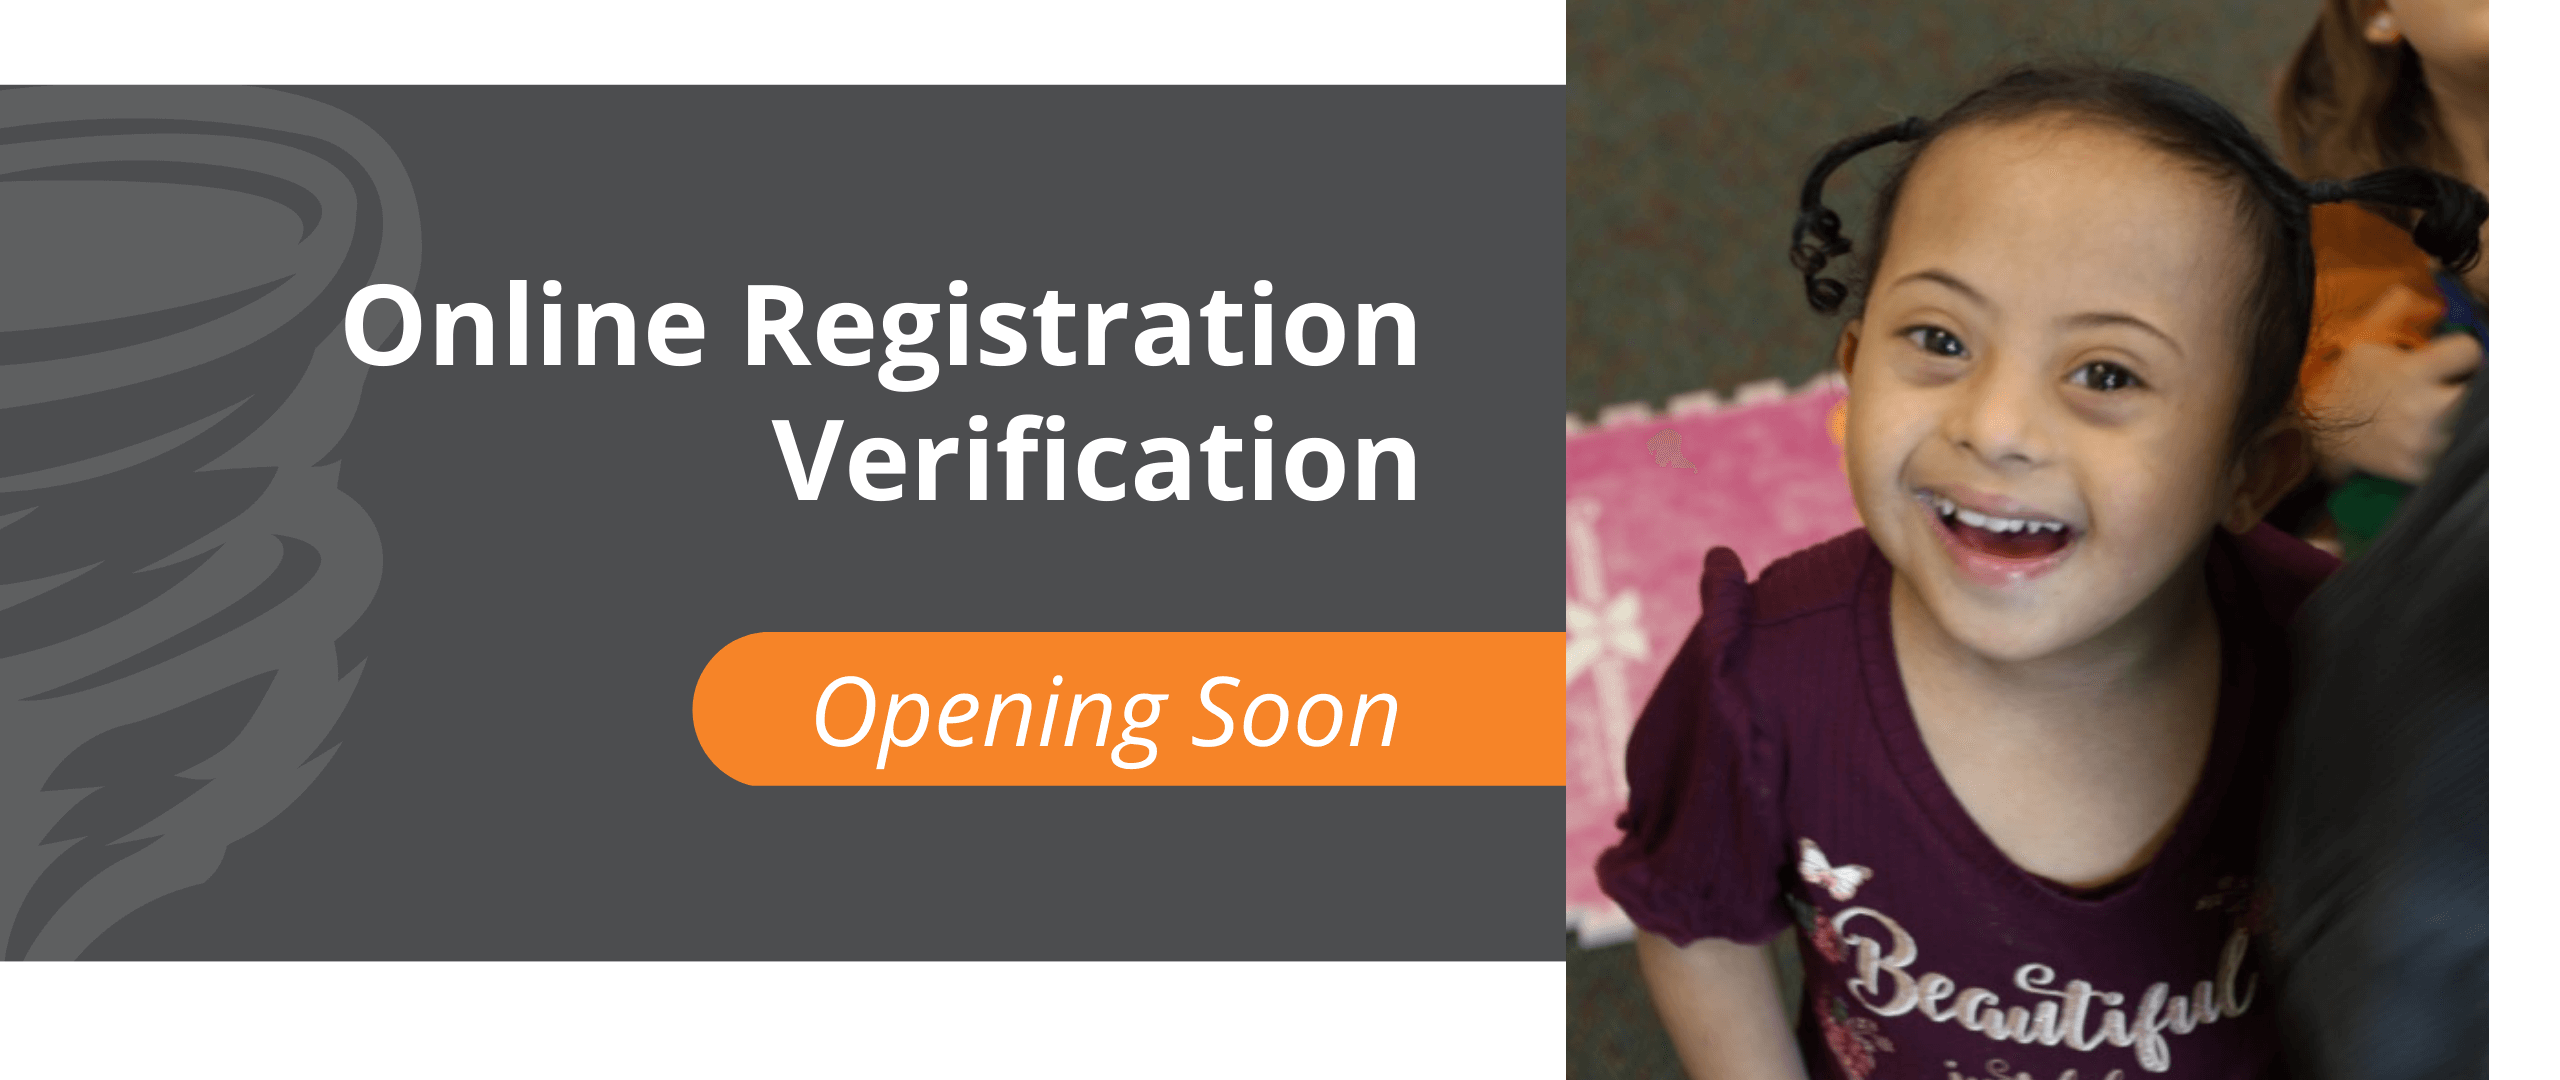 Online Registration Verification Opens Later This Month